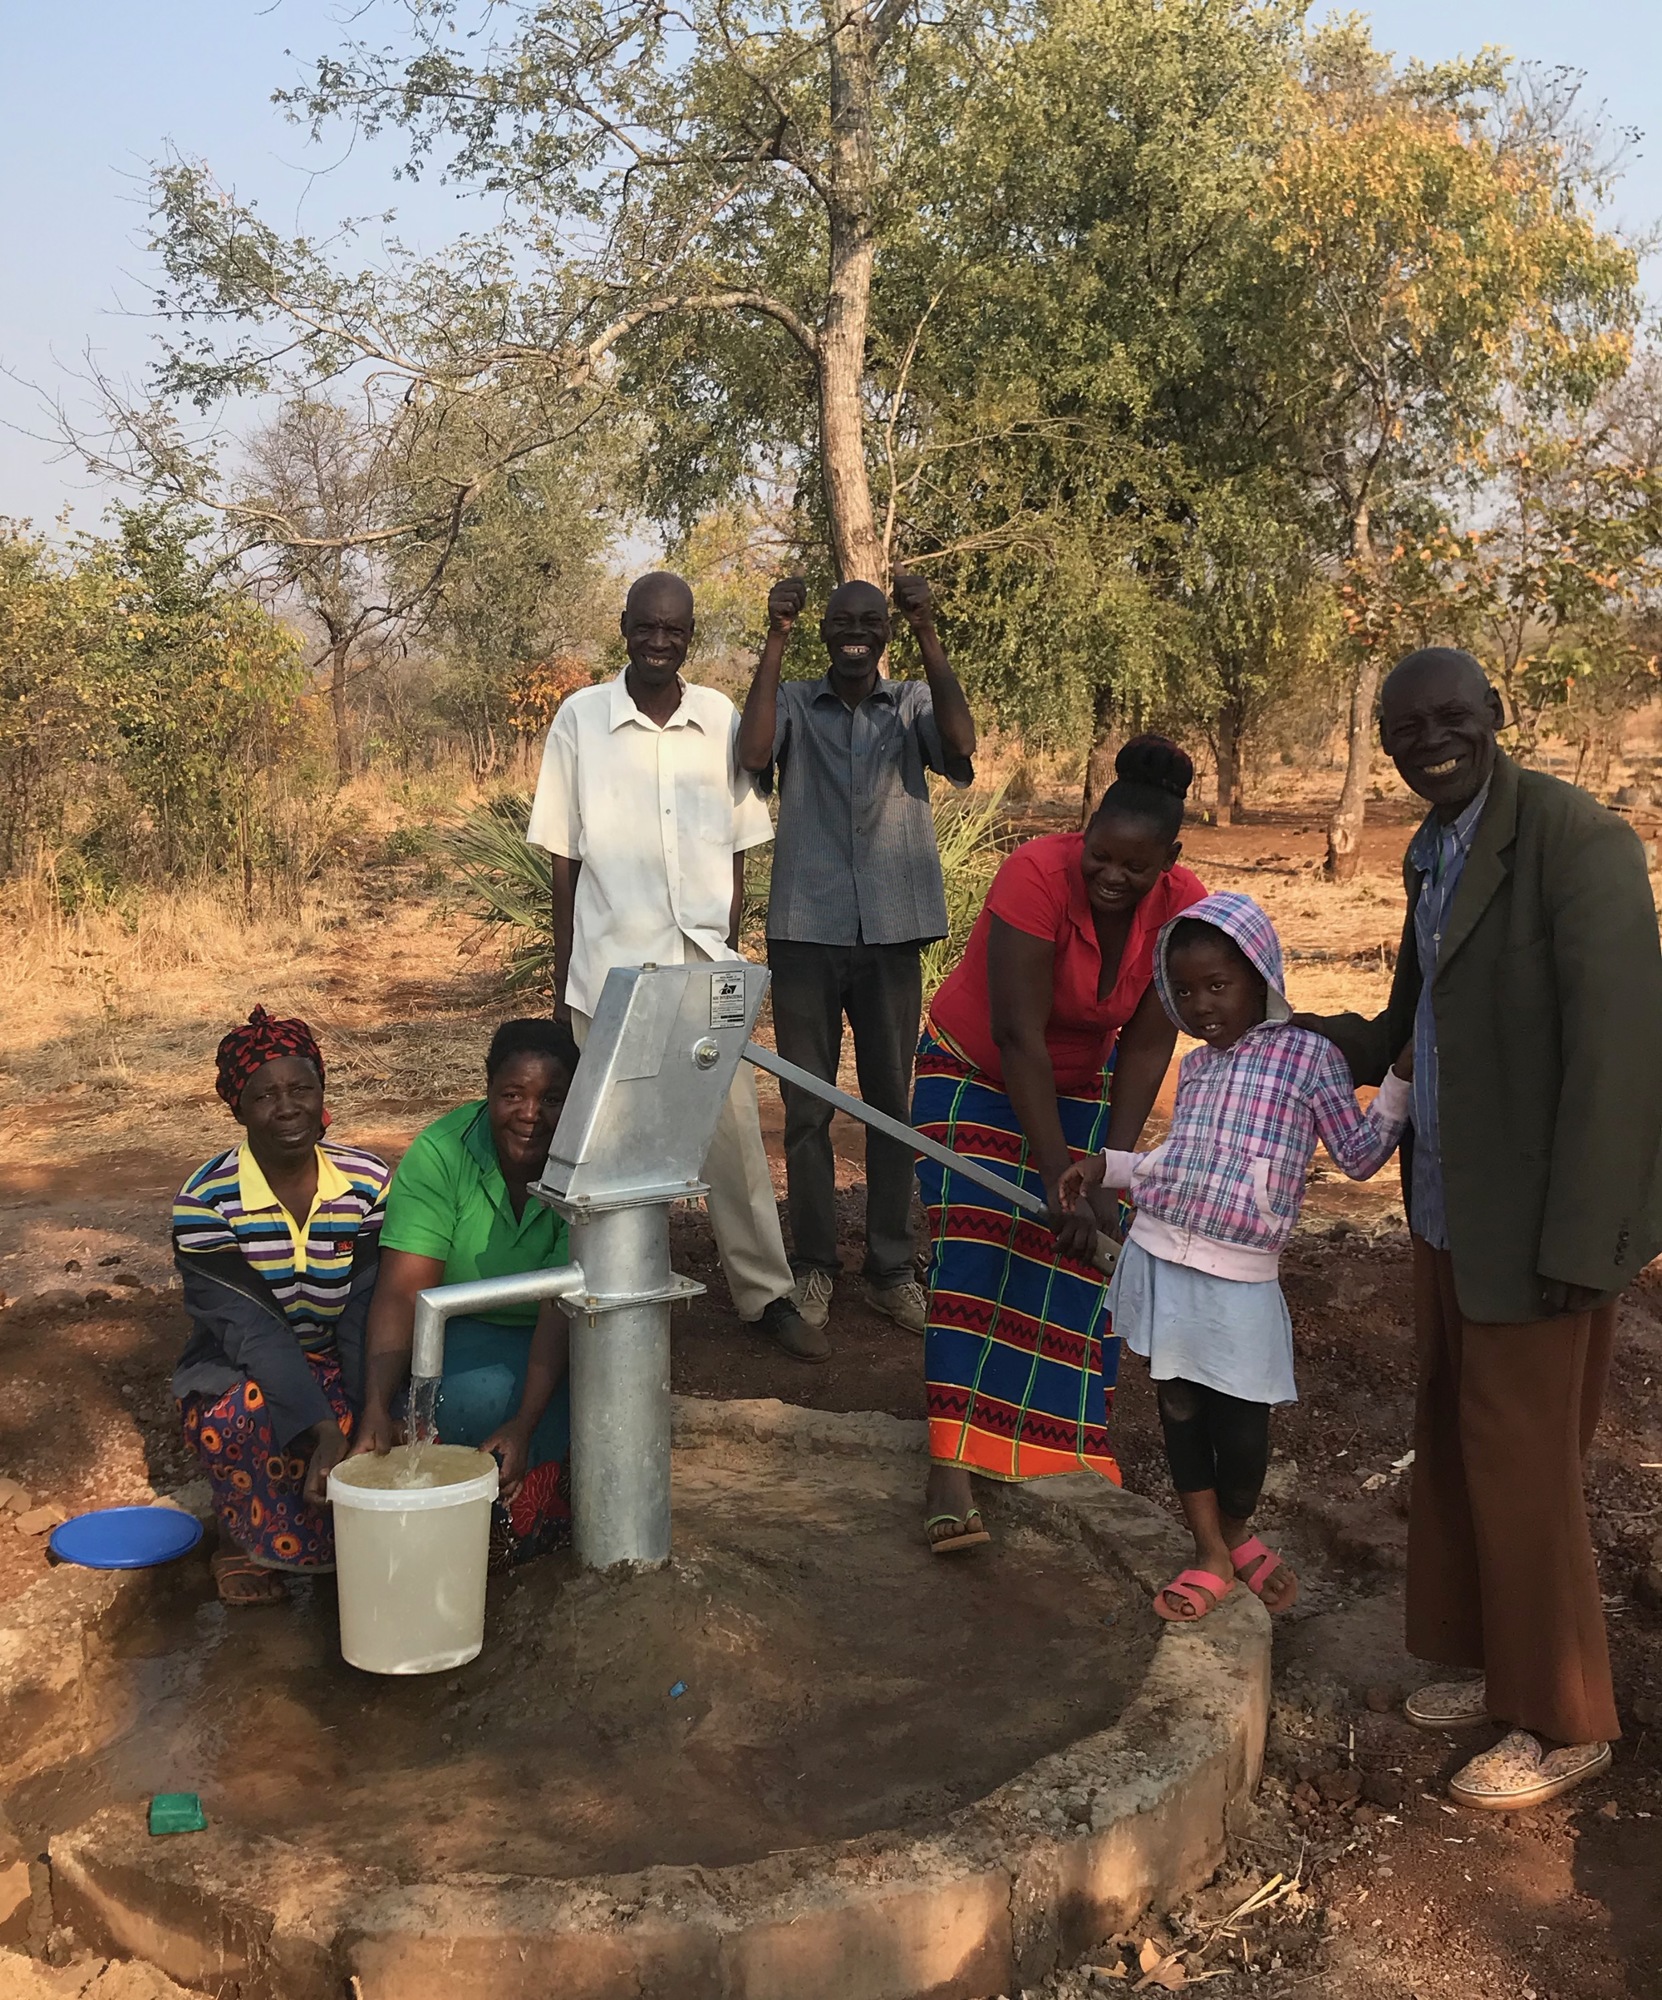 Villages sent photos after the wells were built in Zambia.